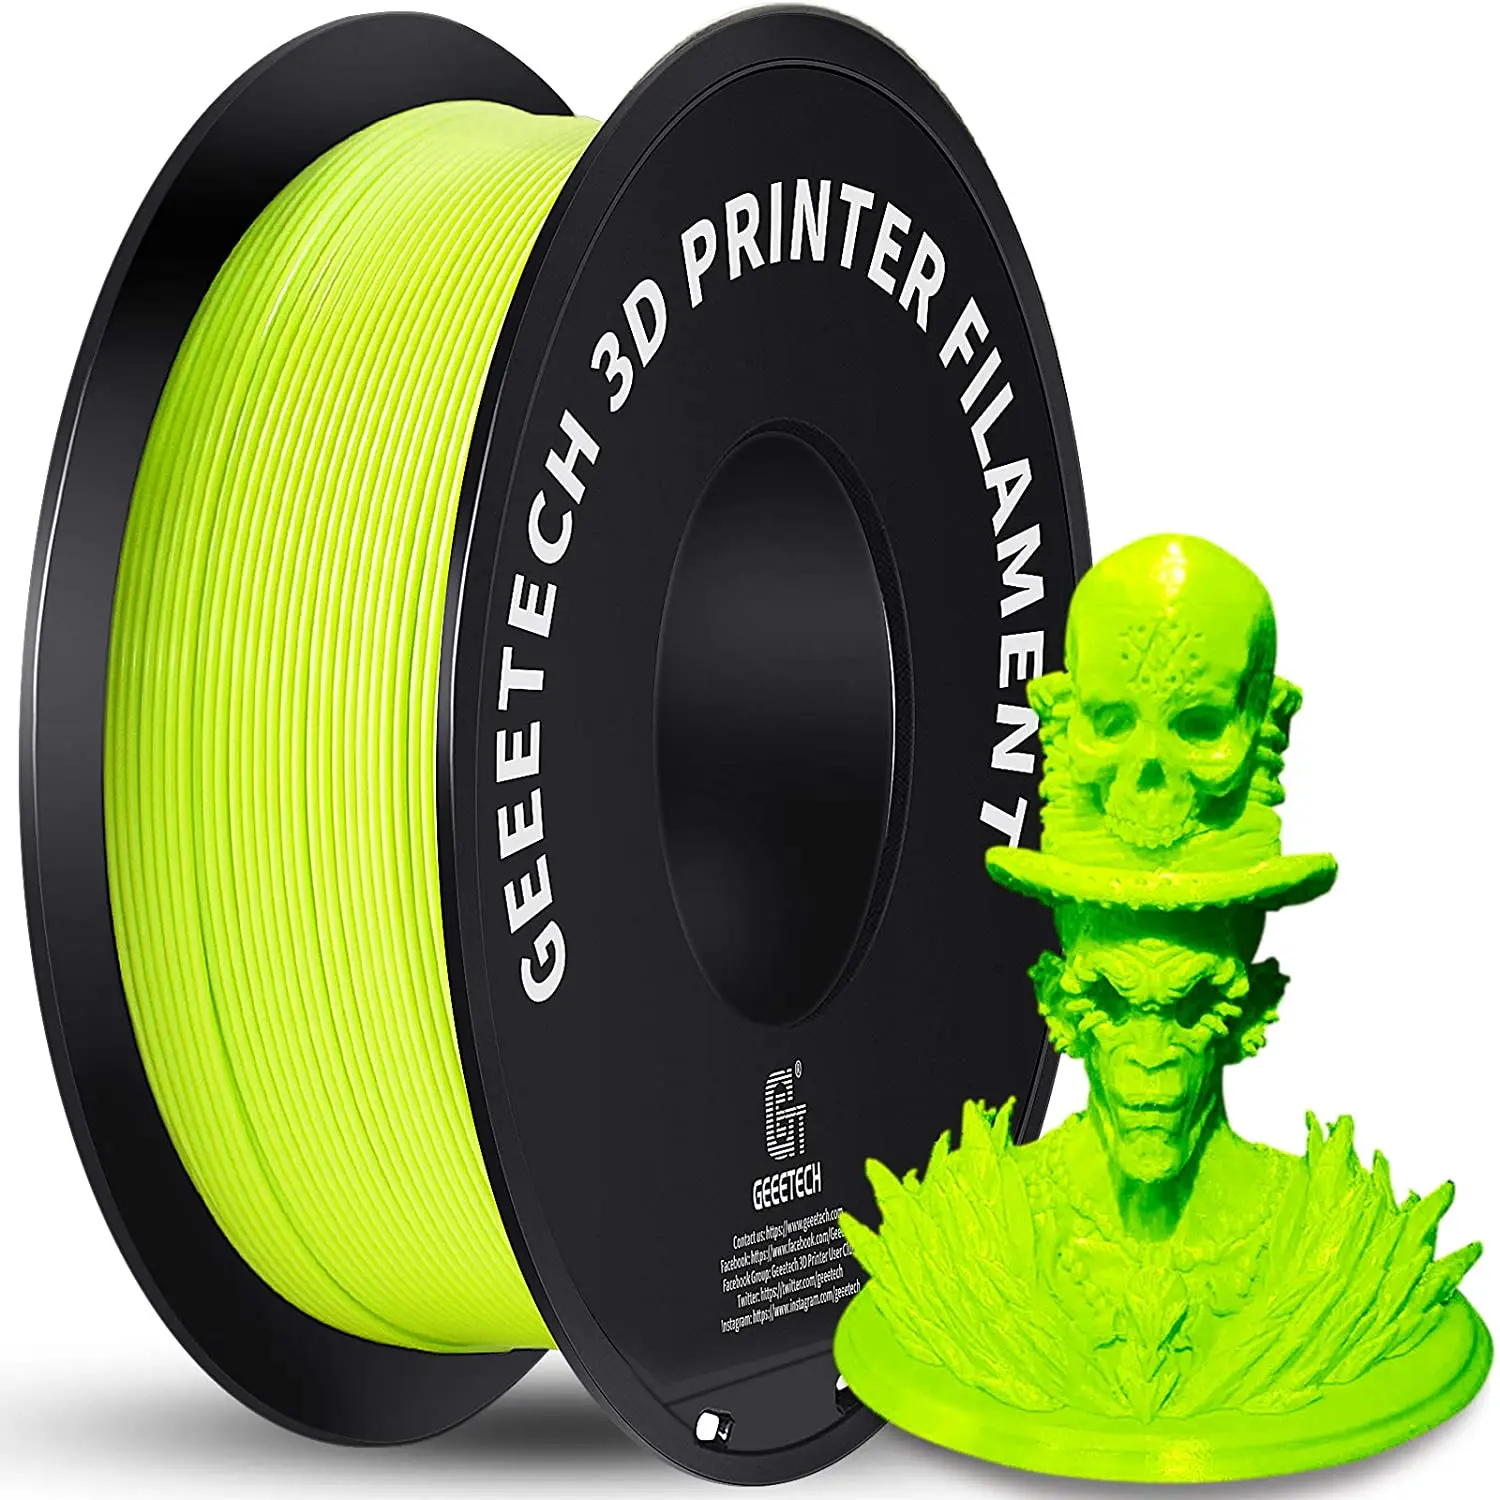 GEEETECH 1roll/1kg 1.75mm PLA Filament  Apple Green Vacuum Packaging Overseas Warehouses Various Colors For 3D Printer Fast Ship geeetech 1kg 1 75mm marble pla 3d printer filament vacuum packaging overseas warehouses a variety of colors fast ship